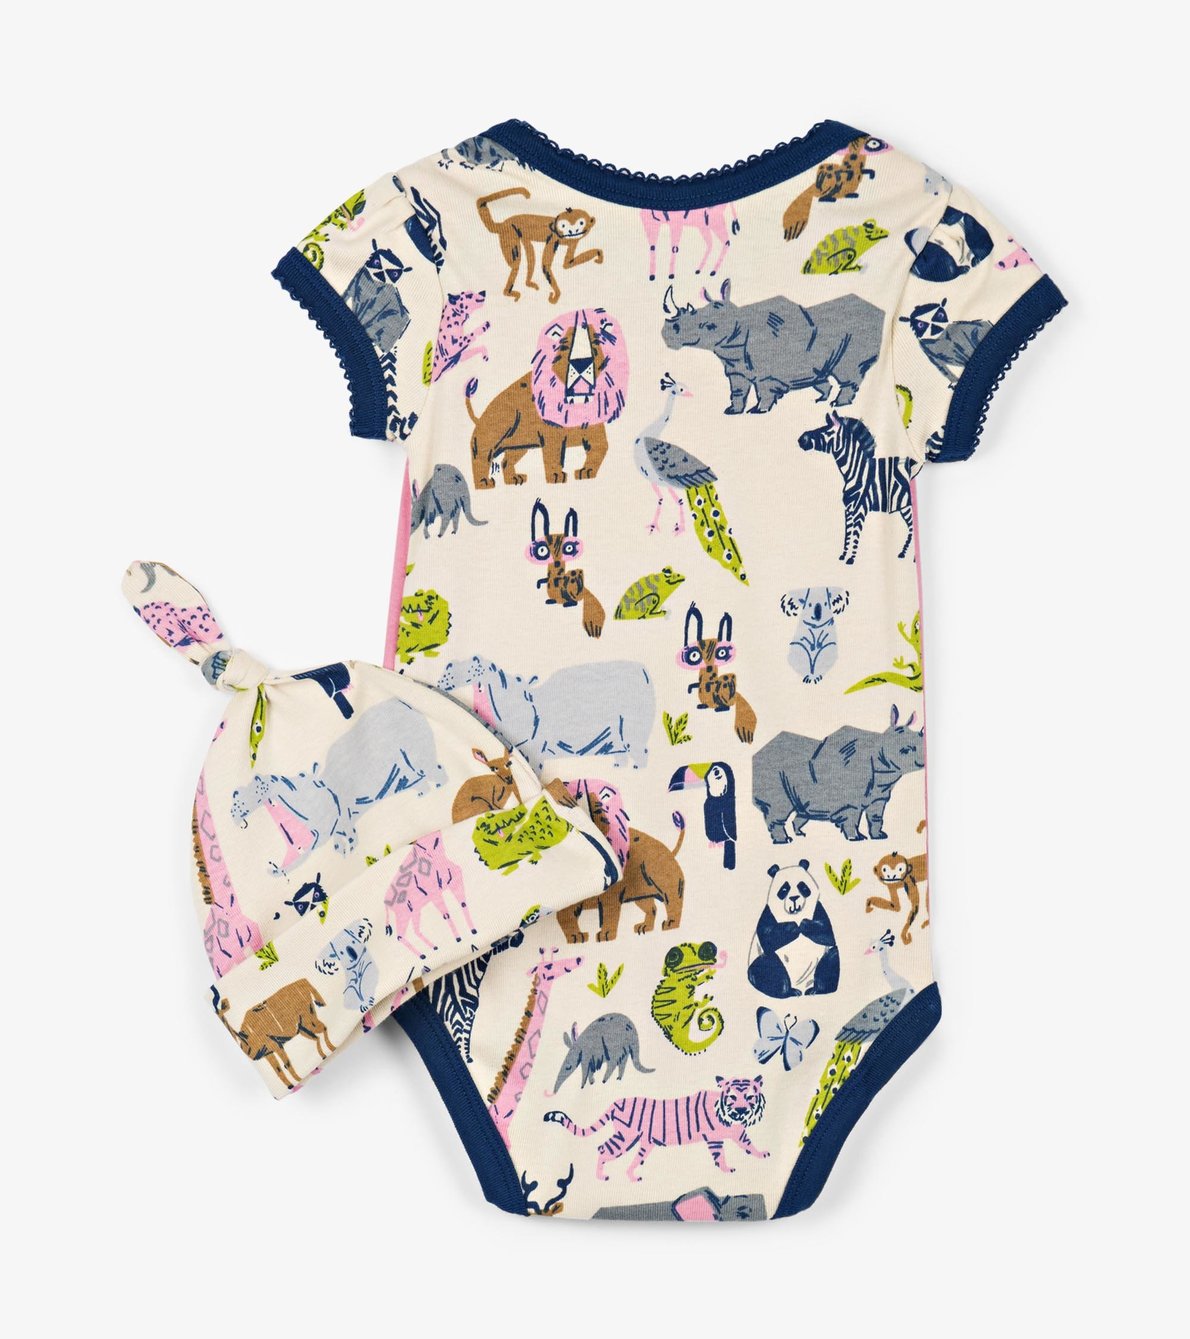 View larger image of Pretty Animal Safari Baby Bodysuit with Hat